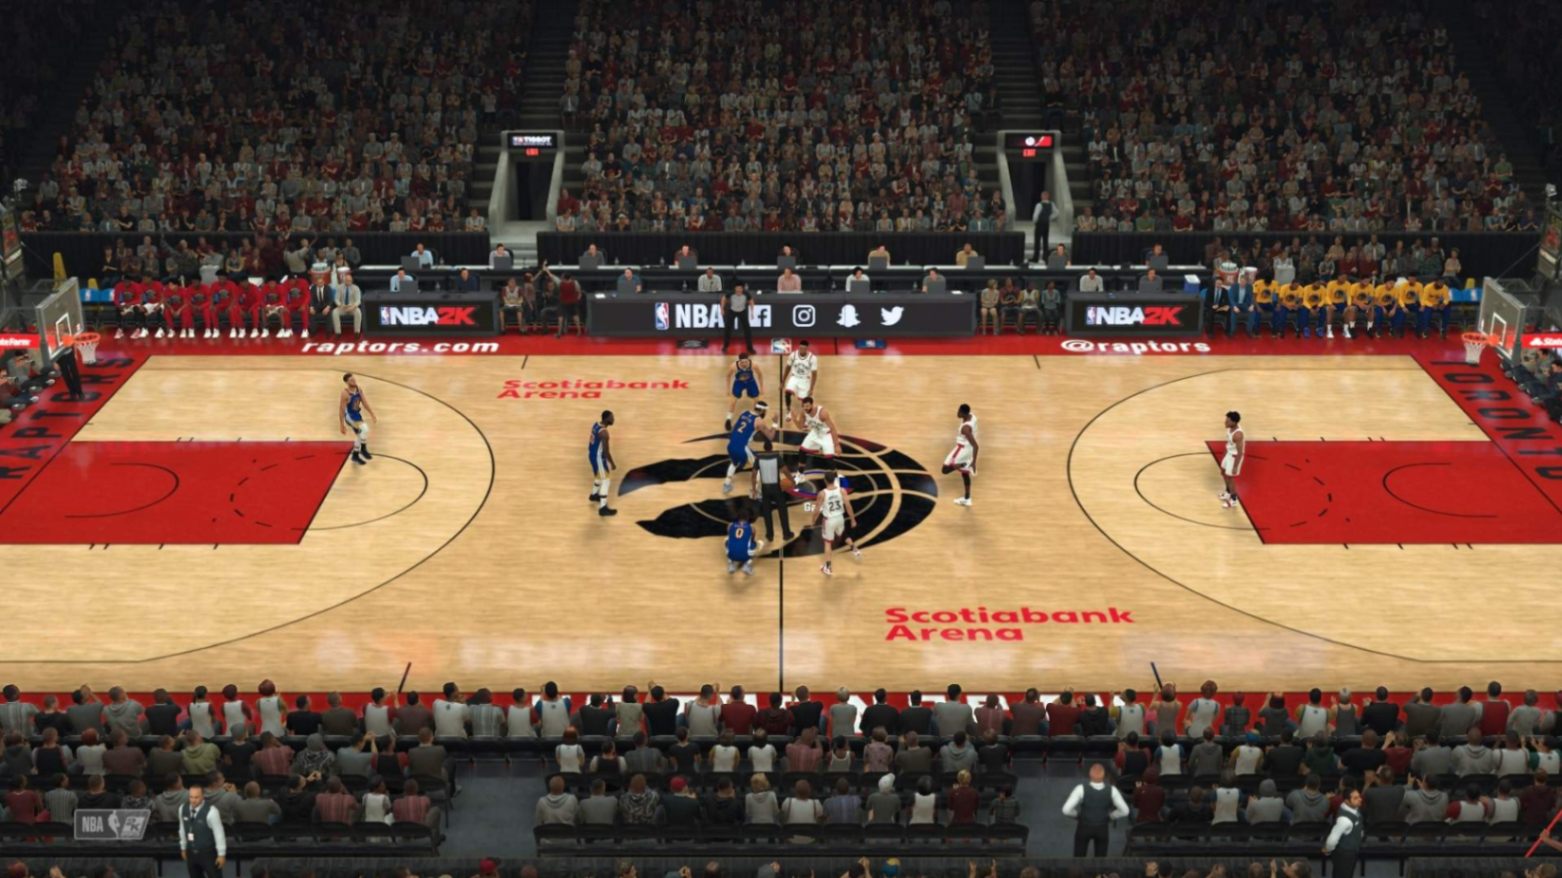 How to Get VC in NBA 2K20